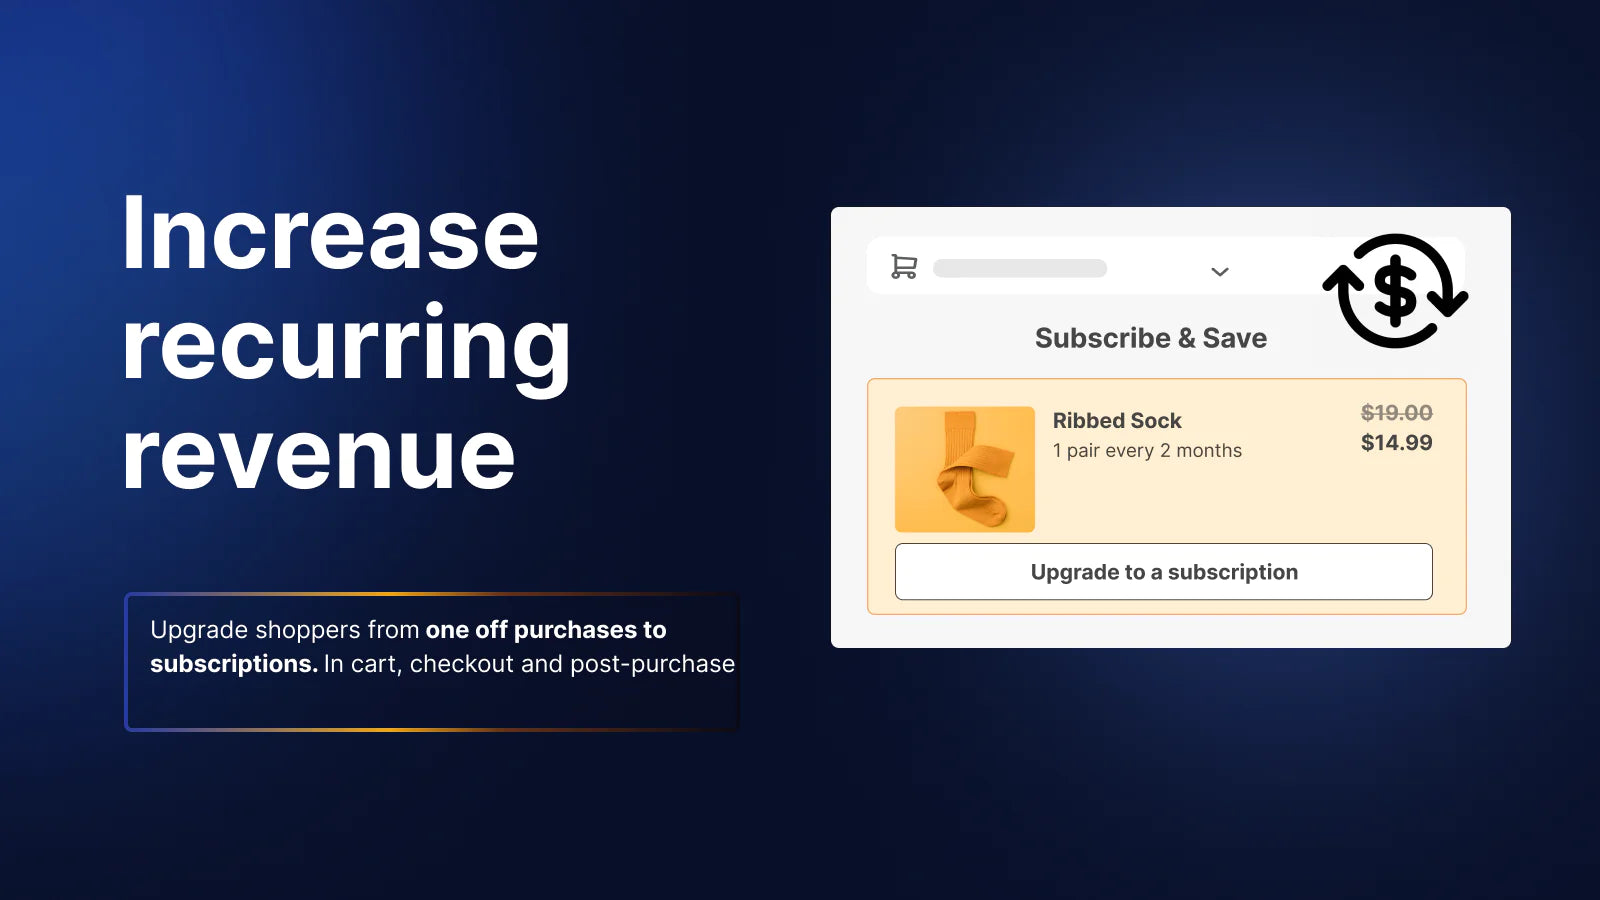 the image shows that you can upgrade to a subscription and can increase recurring revenue